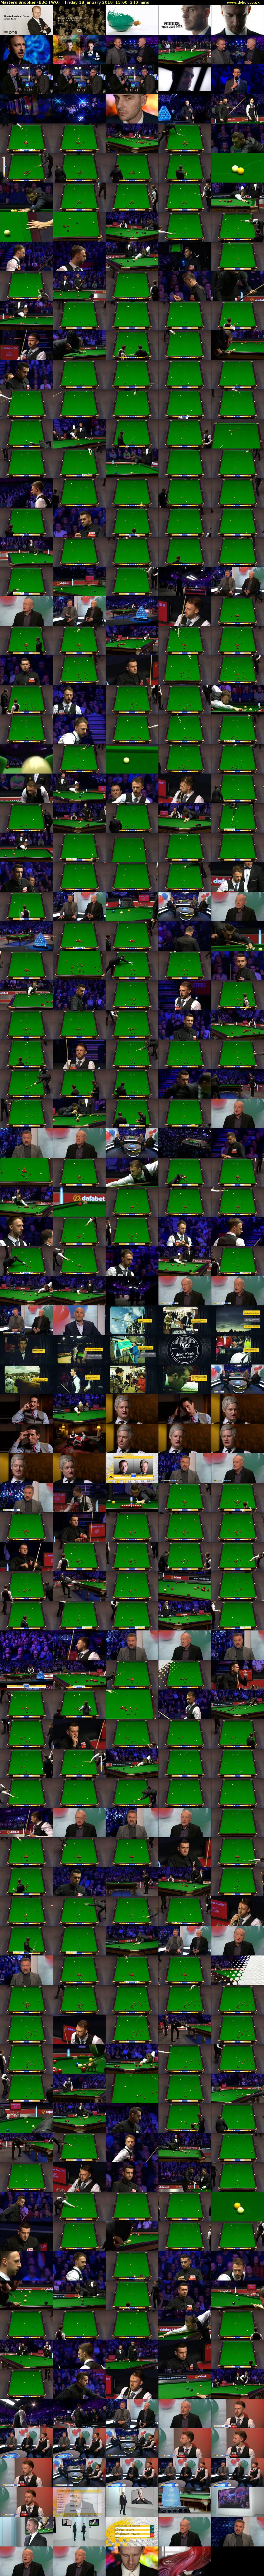 Masters Snooker (BBC TWO) Friday 18 January 2019 13:00 - 17:00